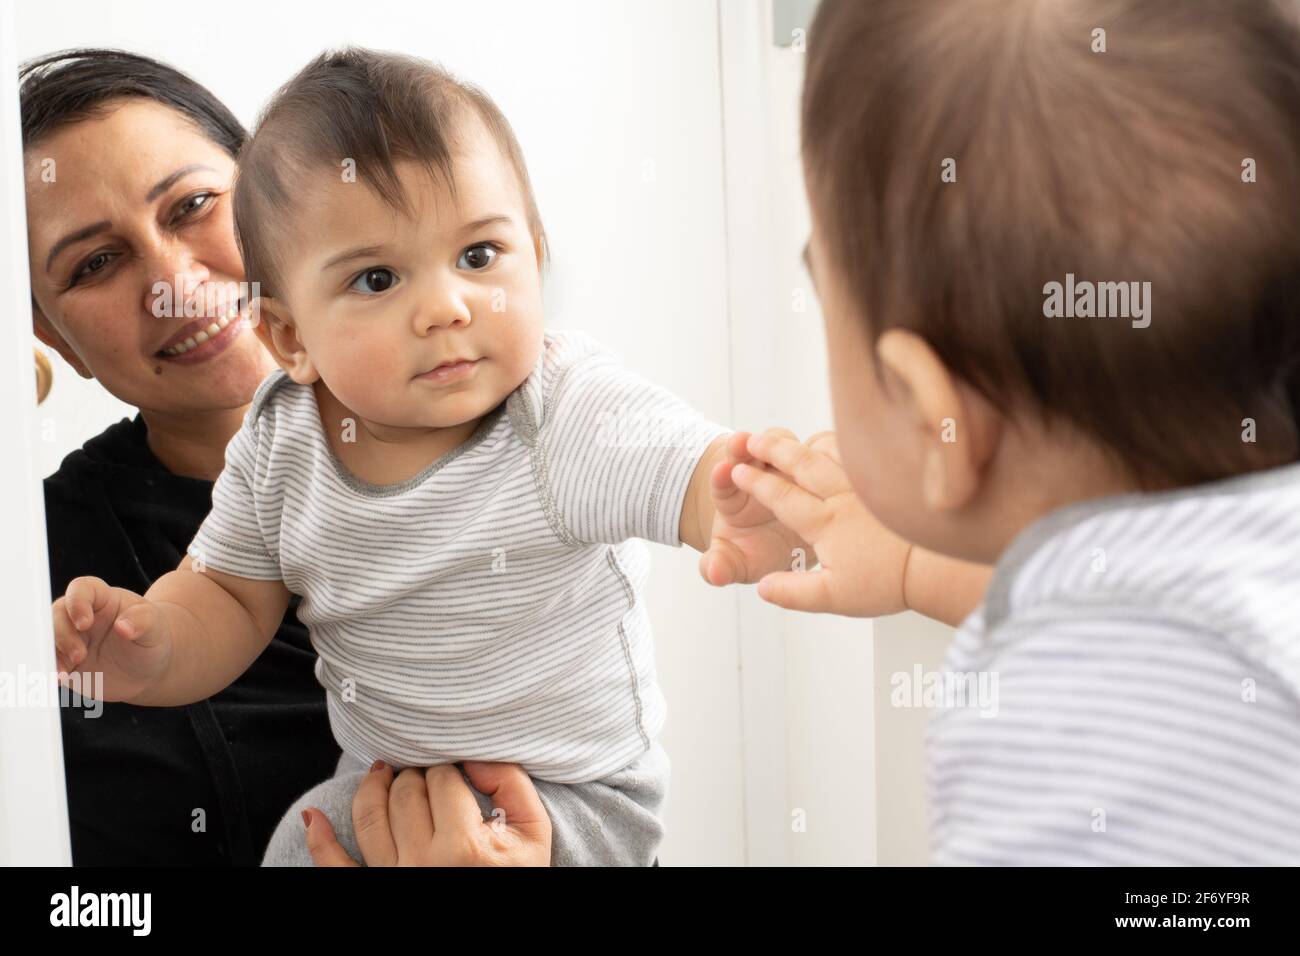 8 month old baby boy with mother looking at reflection in mirror, does not know baby in mirror is himself Stock Photo